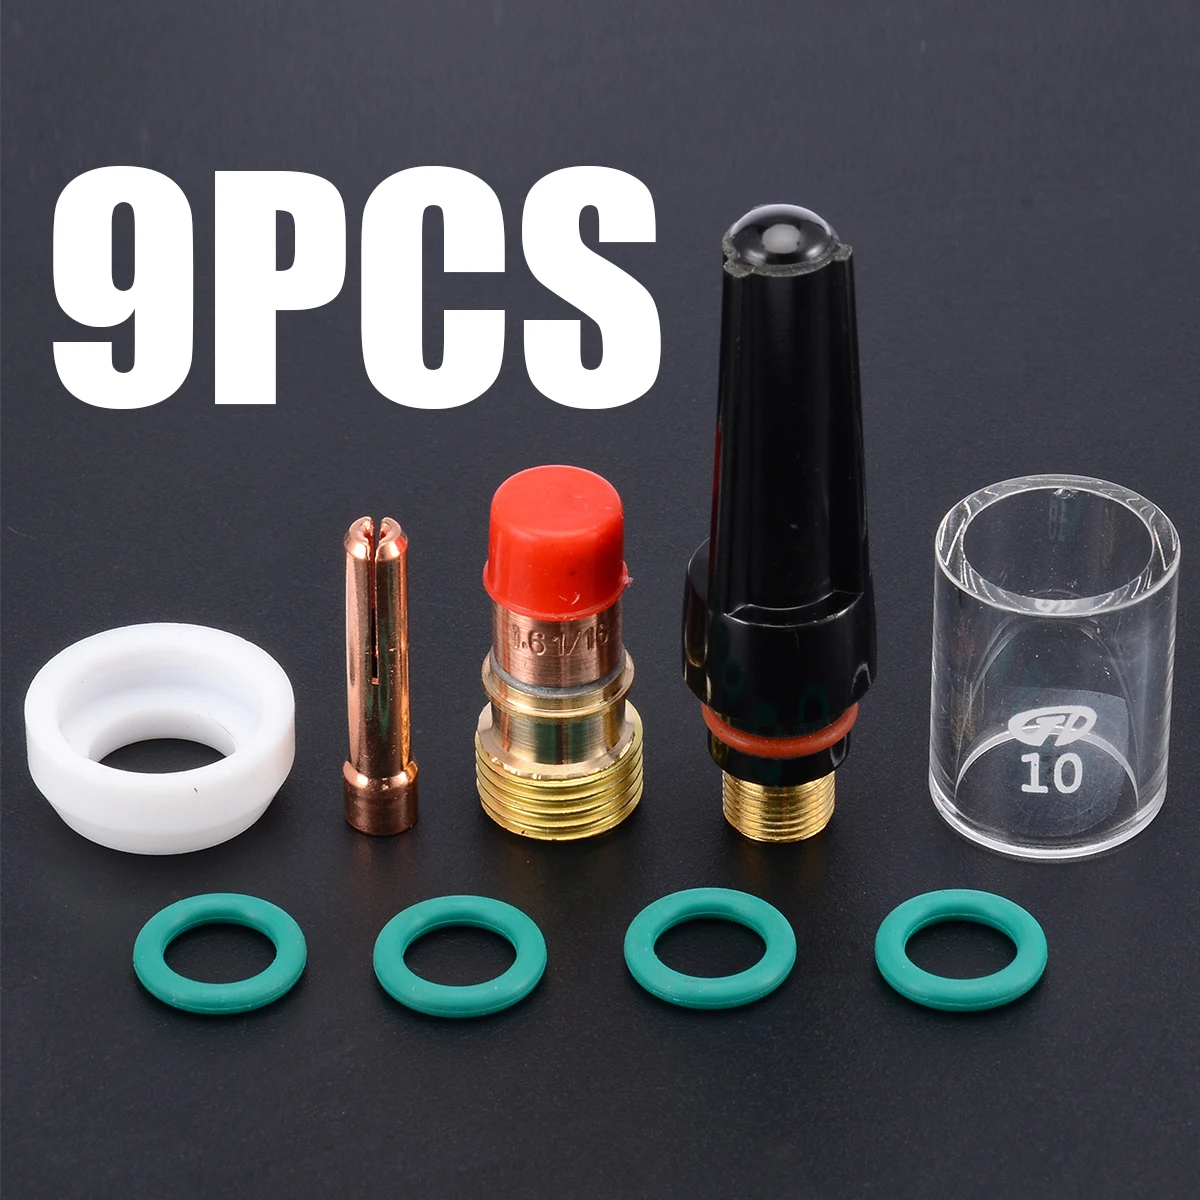 1.6mm 1/16 TIG Welding Torch Stubby Gas Lens #12 Pyrex Cup Kit For Tig WP-17/18